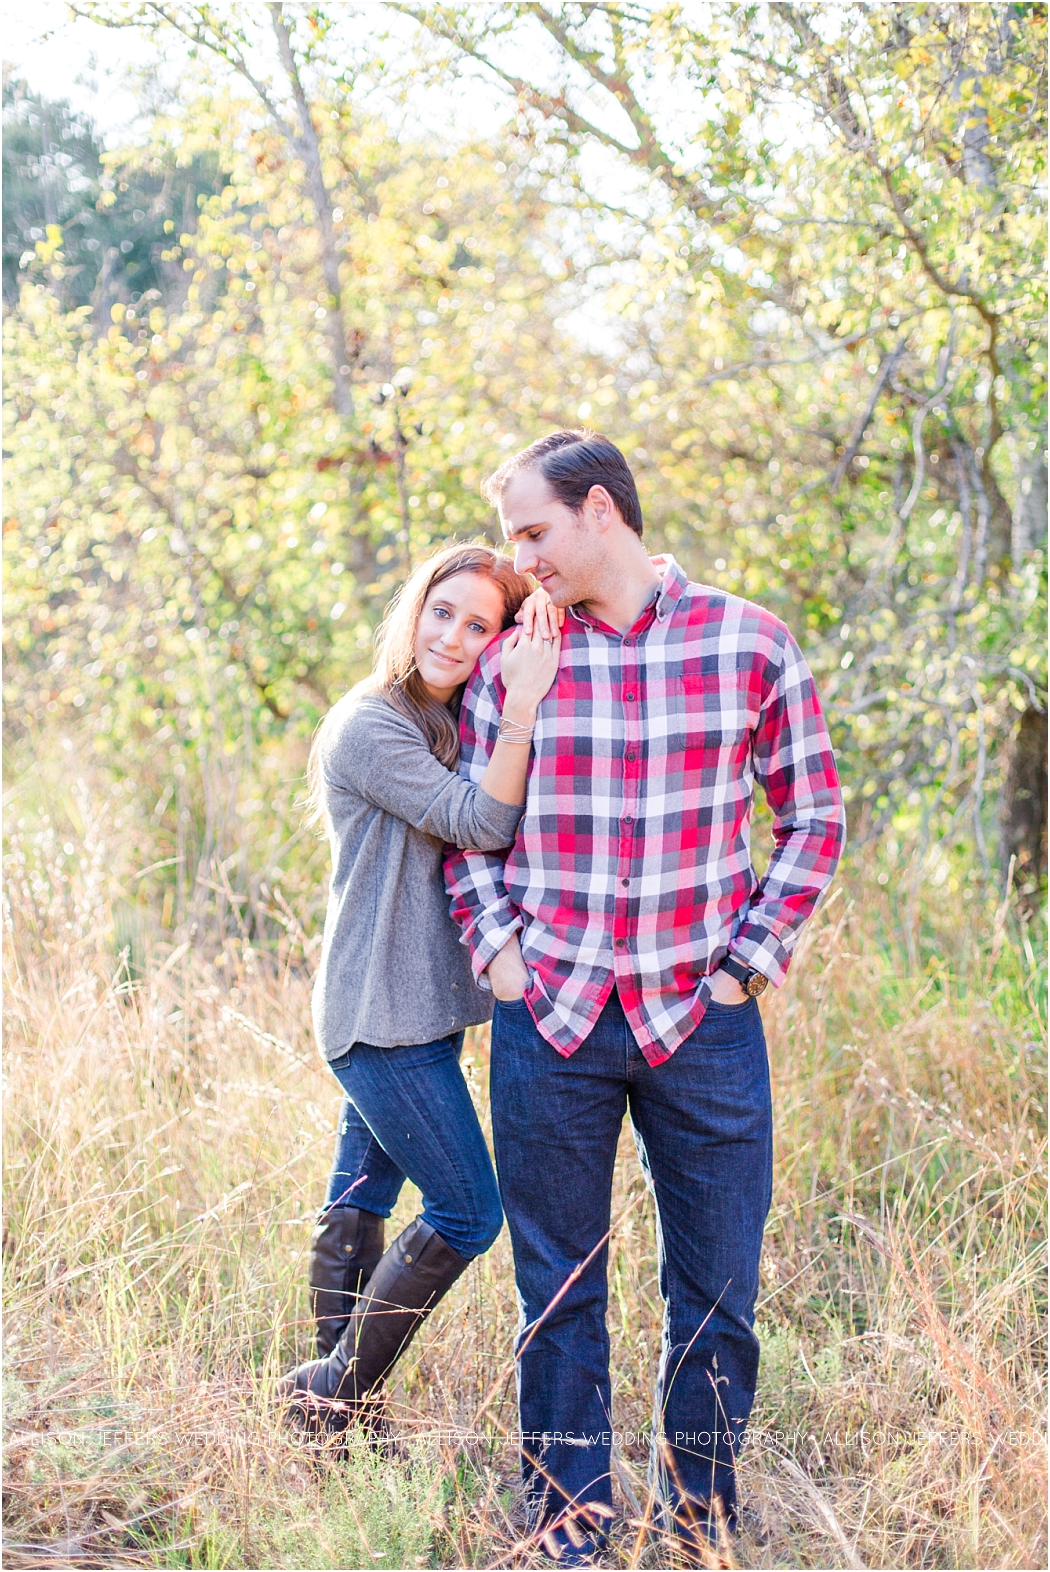 a-fall-engagement-session-in-fredericksburg-texas-by-allison-jeffers-wedding-photography_0013